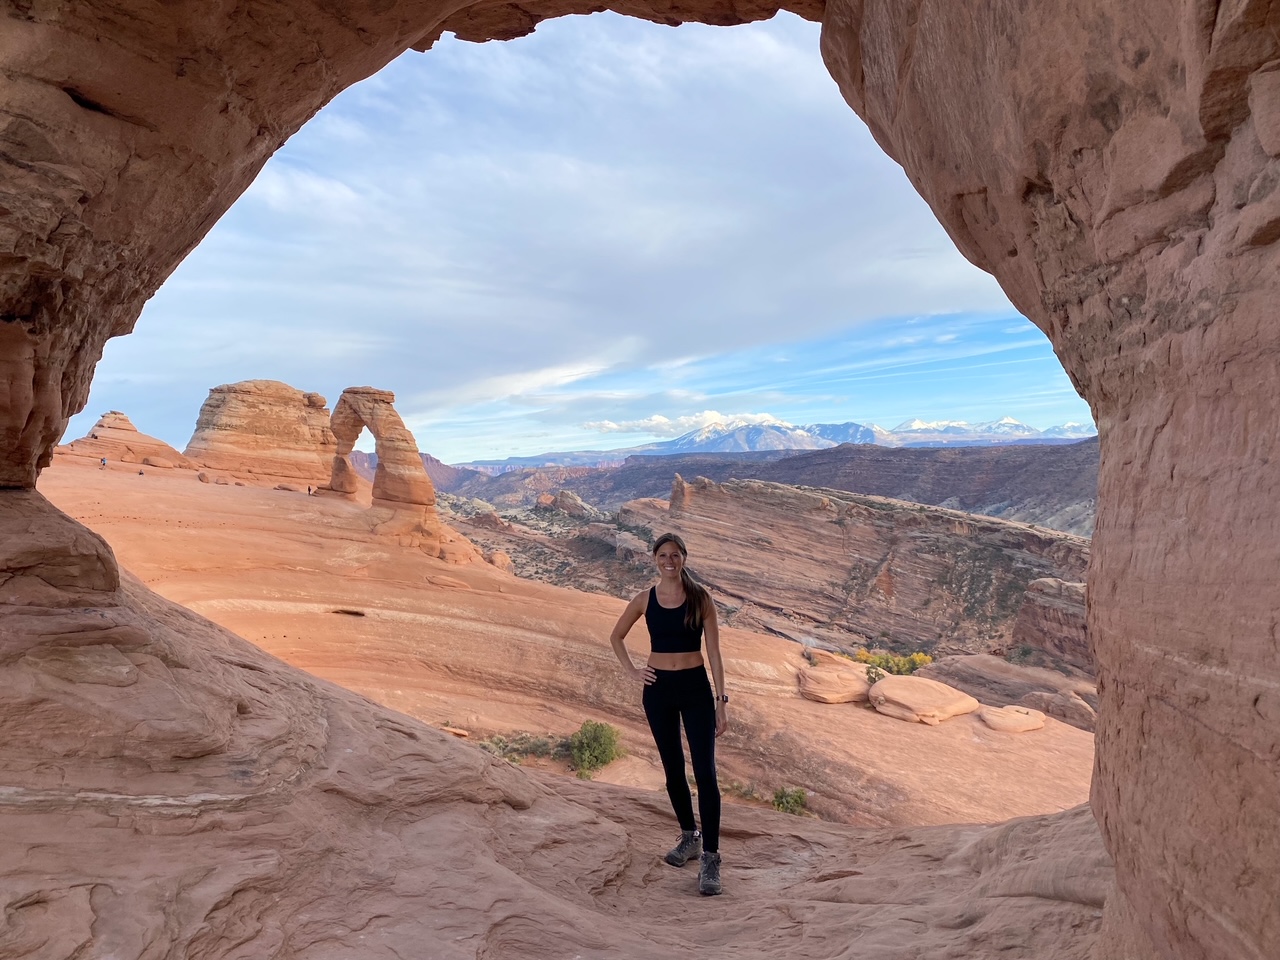 a neat view along the Delicate Arch Trail in Arches National Park